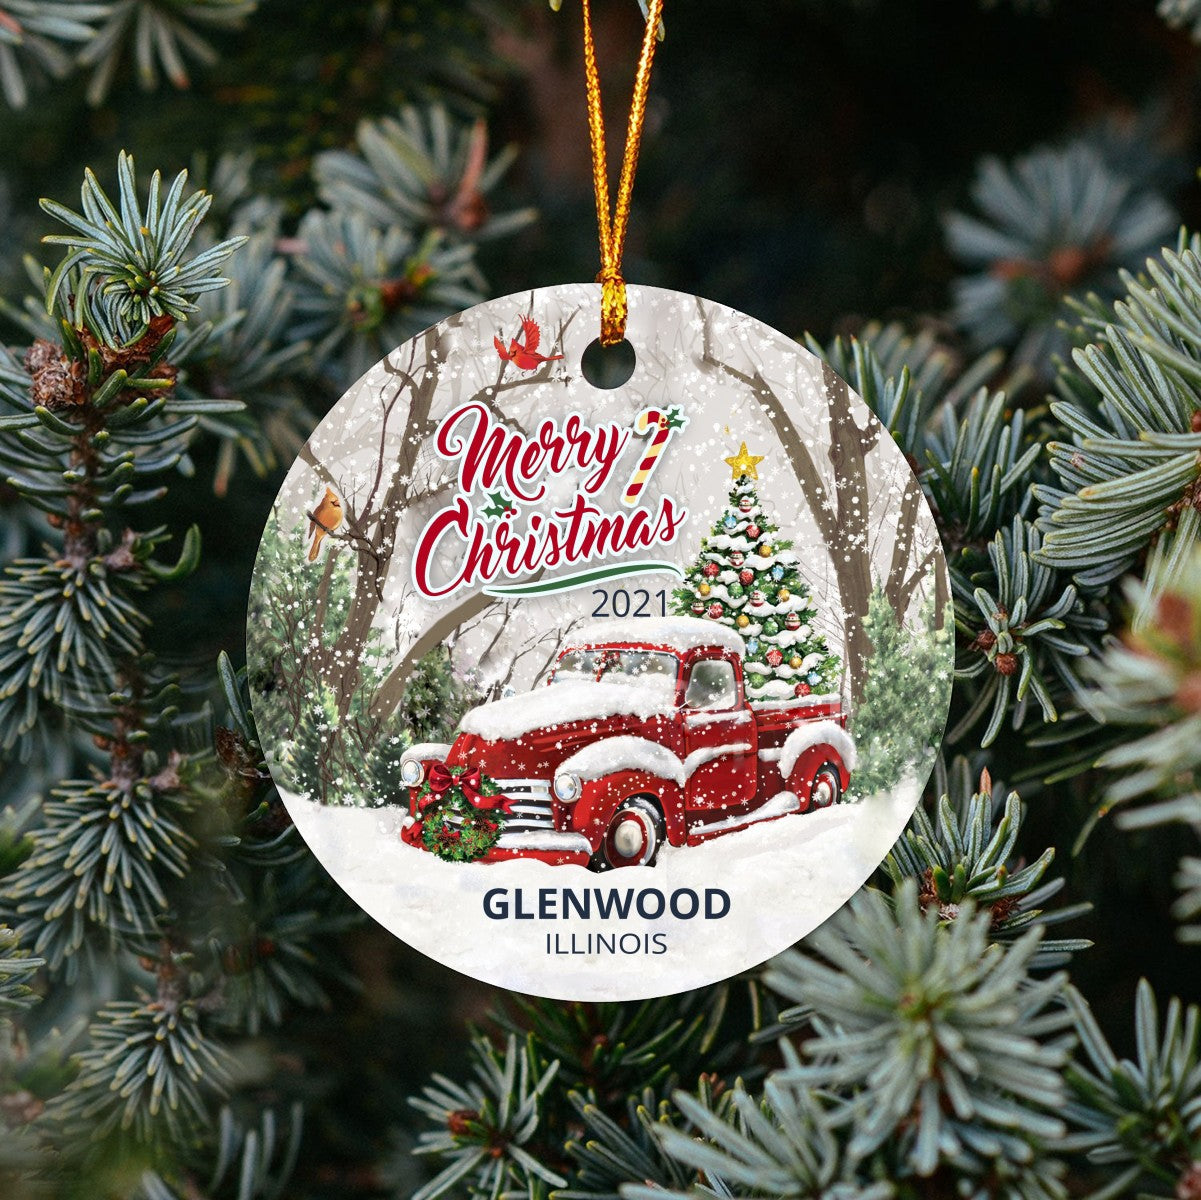 Christmas Tree Ornaments Glenwood - Ornament With Name City, State Glenwood Illinois IL Ornament - Red Truck Xmas Ornaments 3'' Plastic Gift For Family, Friend And Housewarming